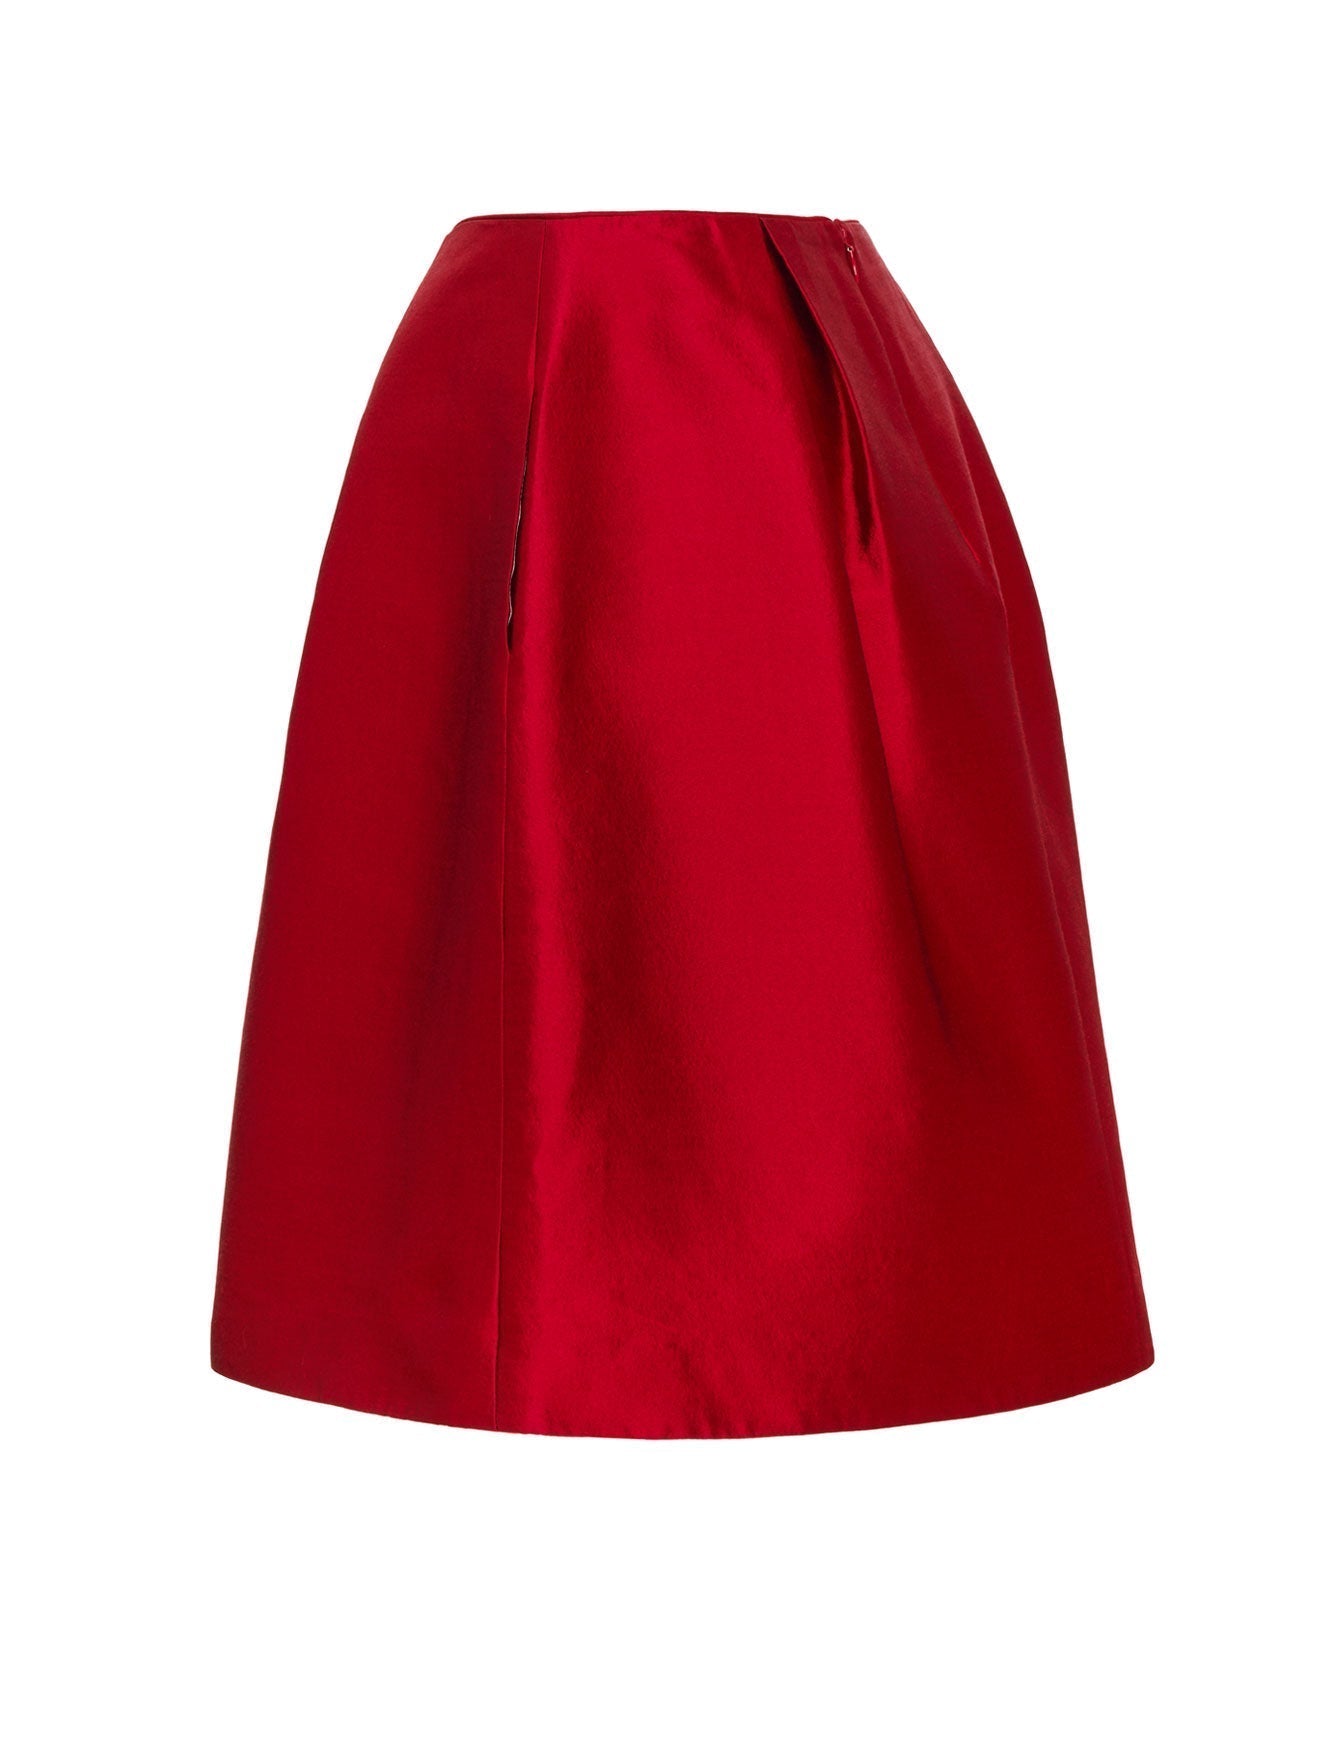 Classic A-line Cocktail Skirt with Pockets — The Diana II - Senza Tempo Fashion